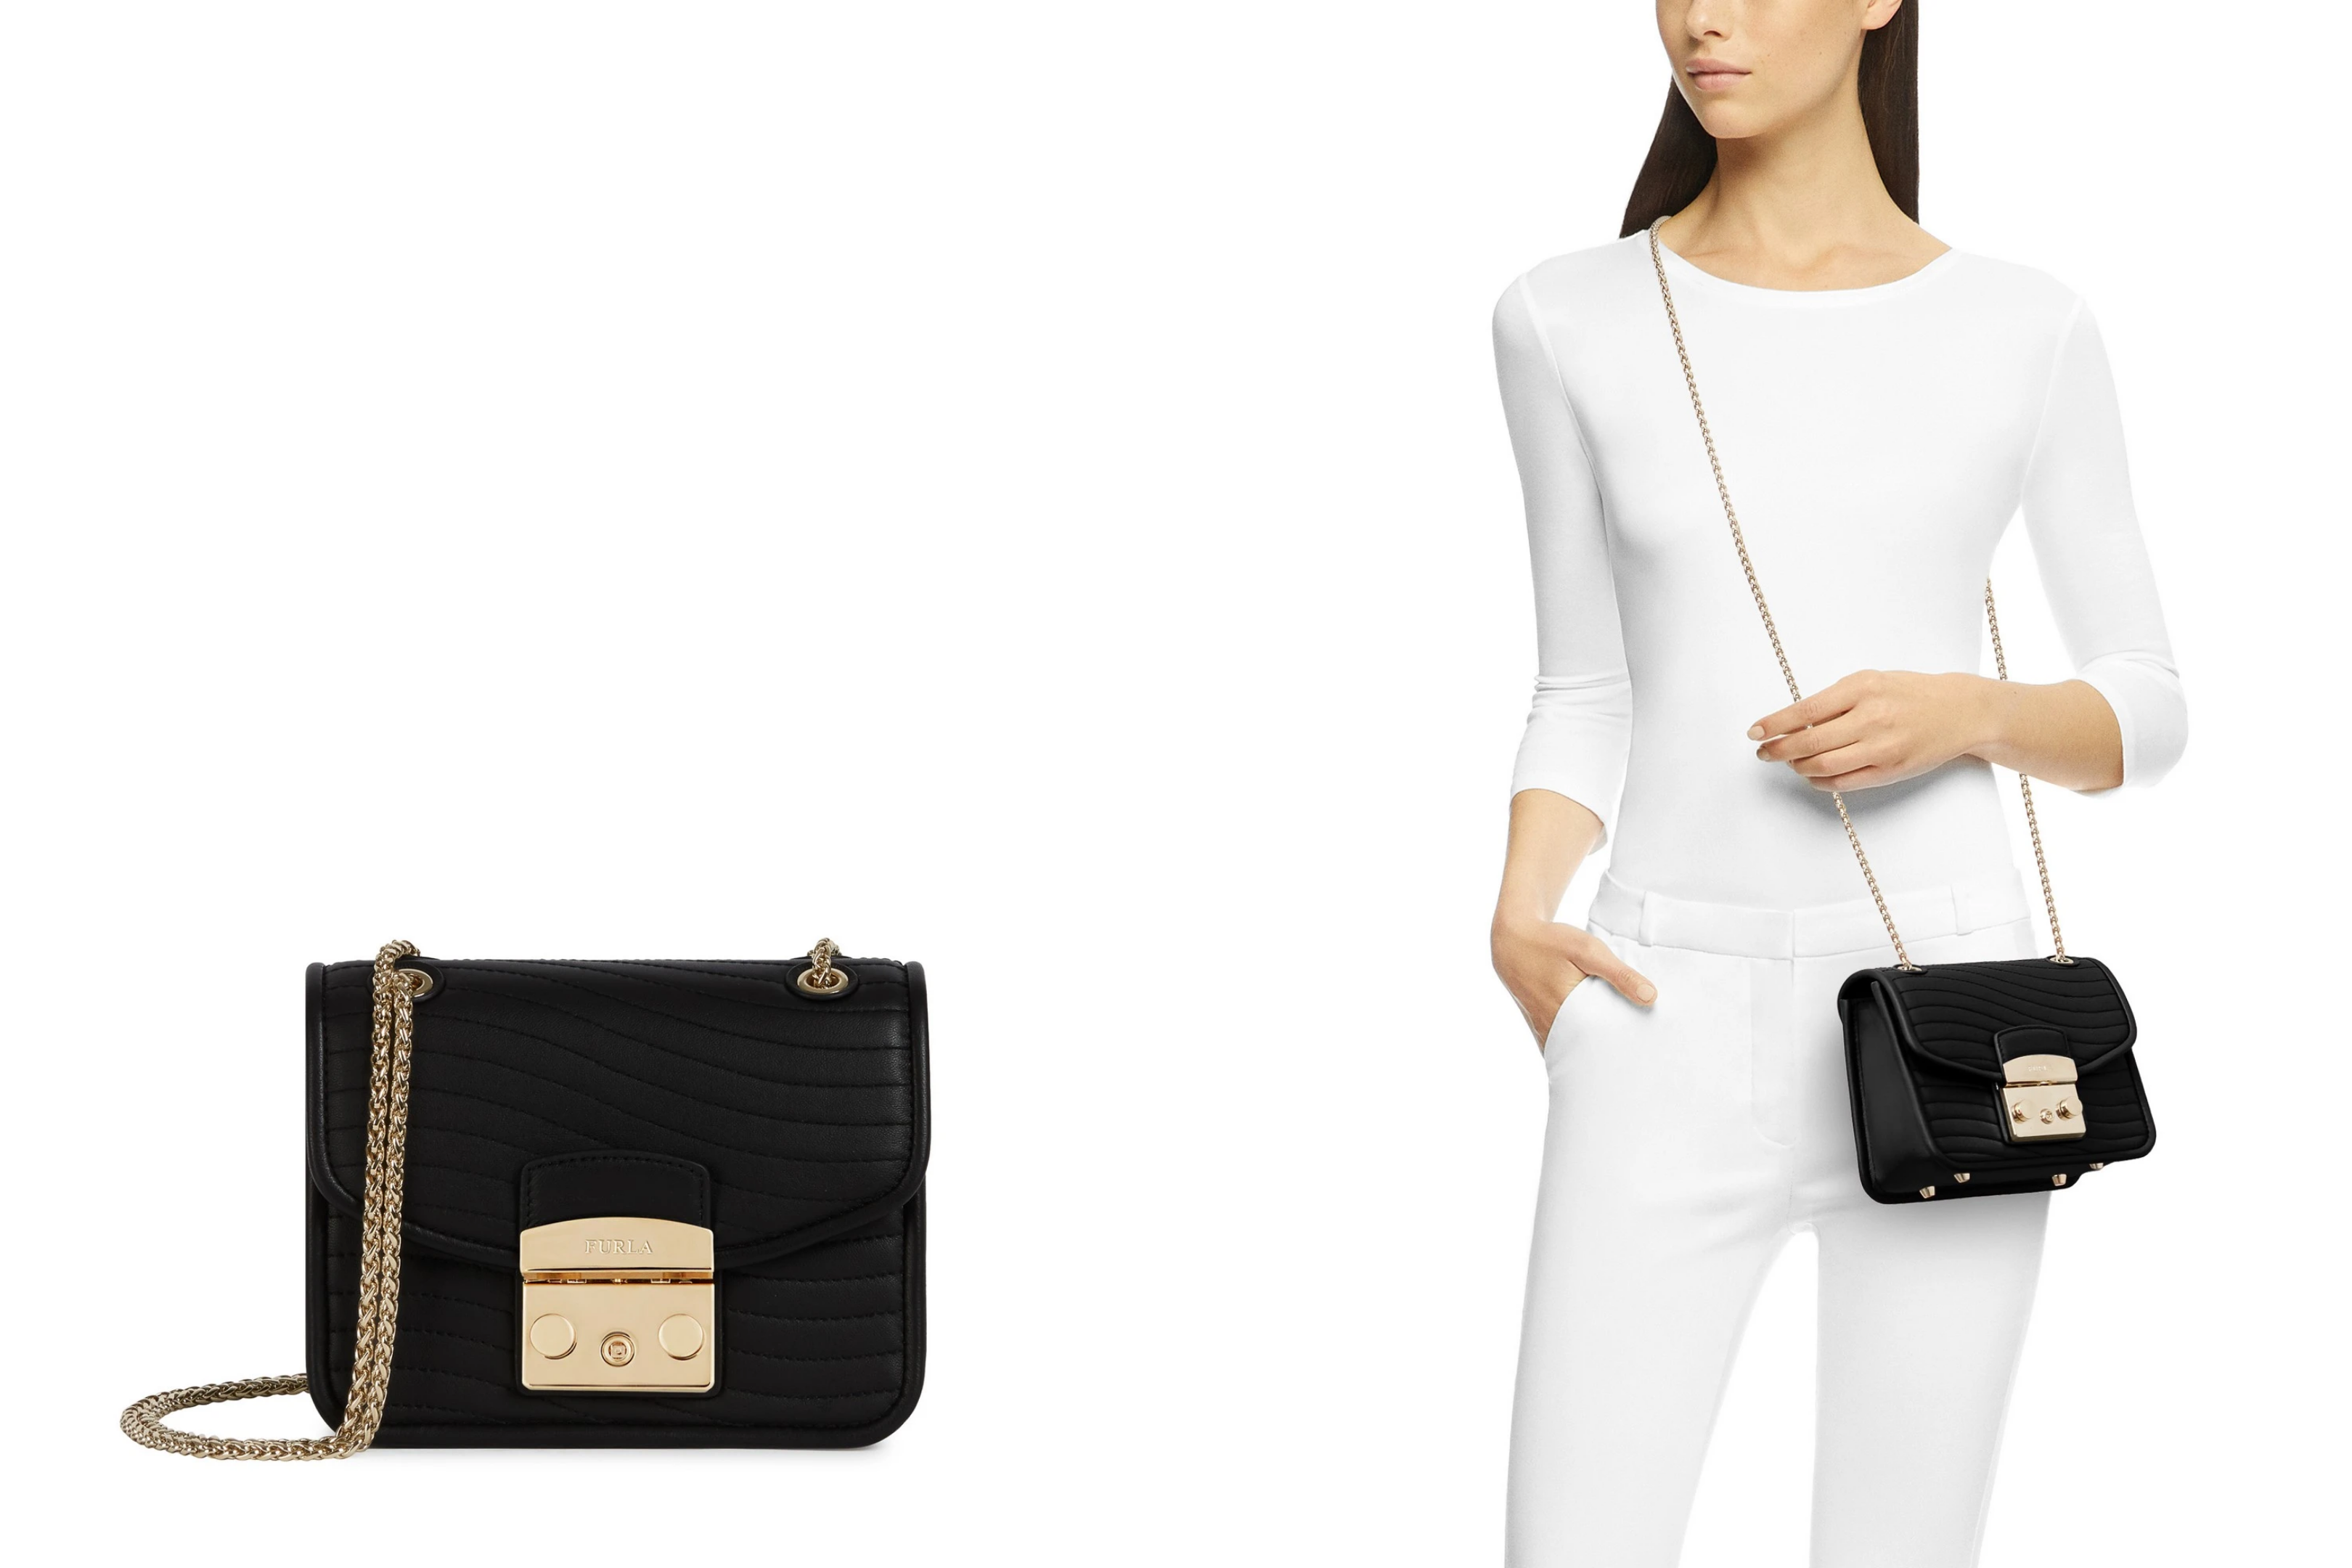 Furla Flash Sale: Up to 70% off! | Buyandship SG | Shop Worldwide and ...